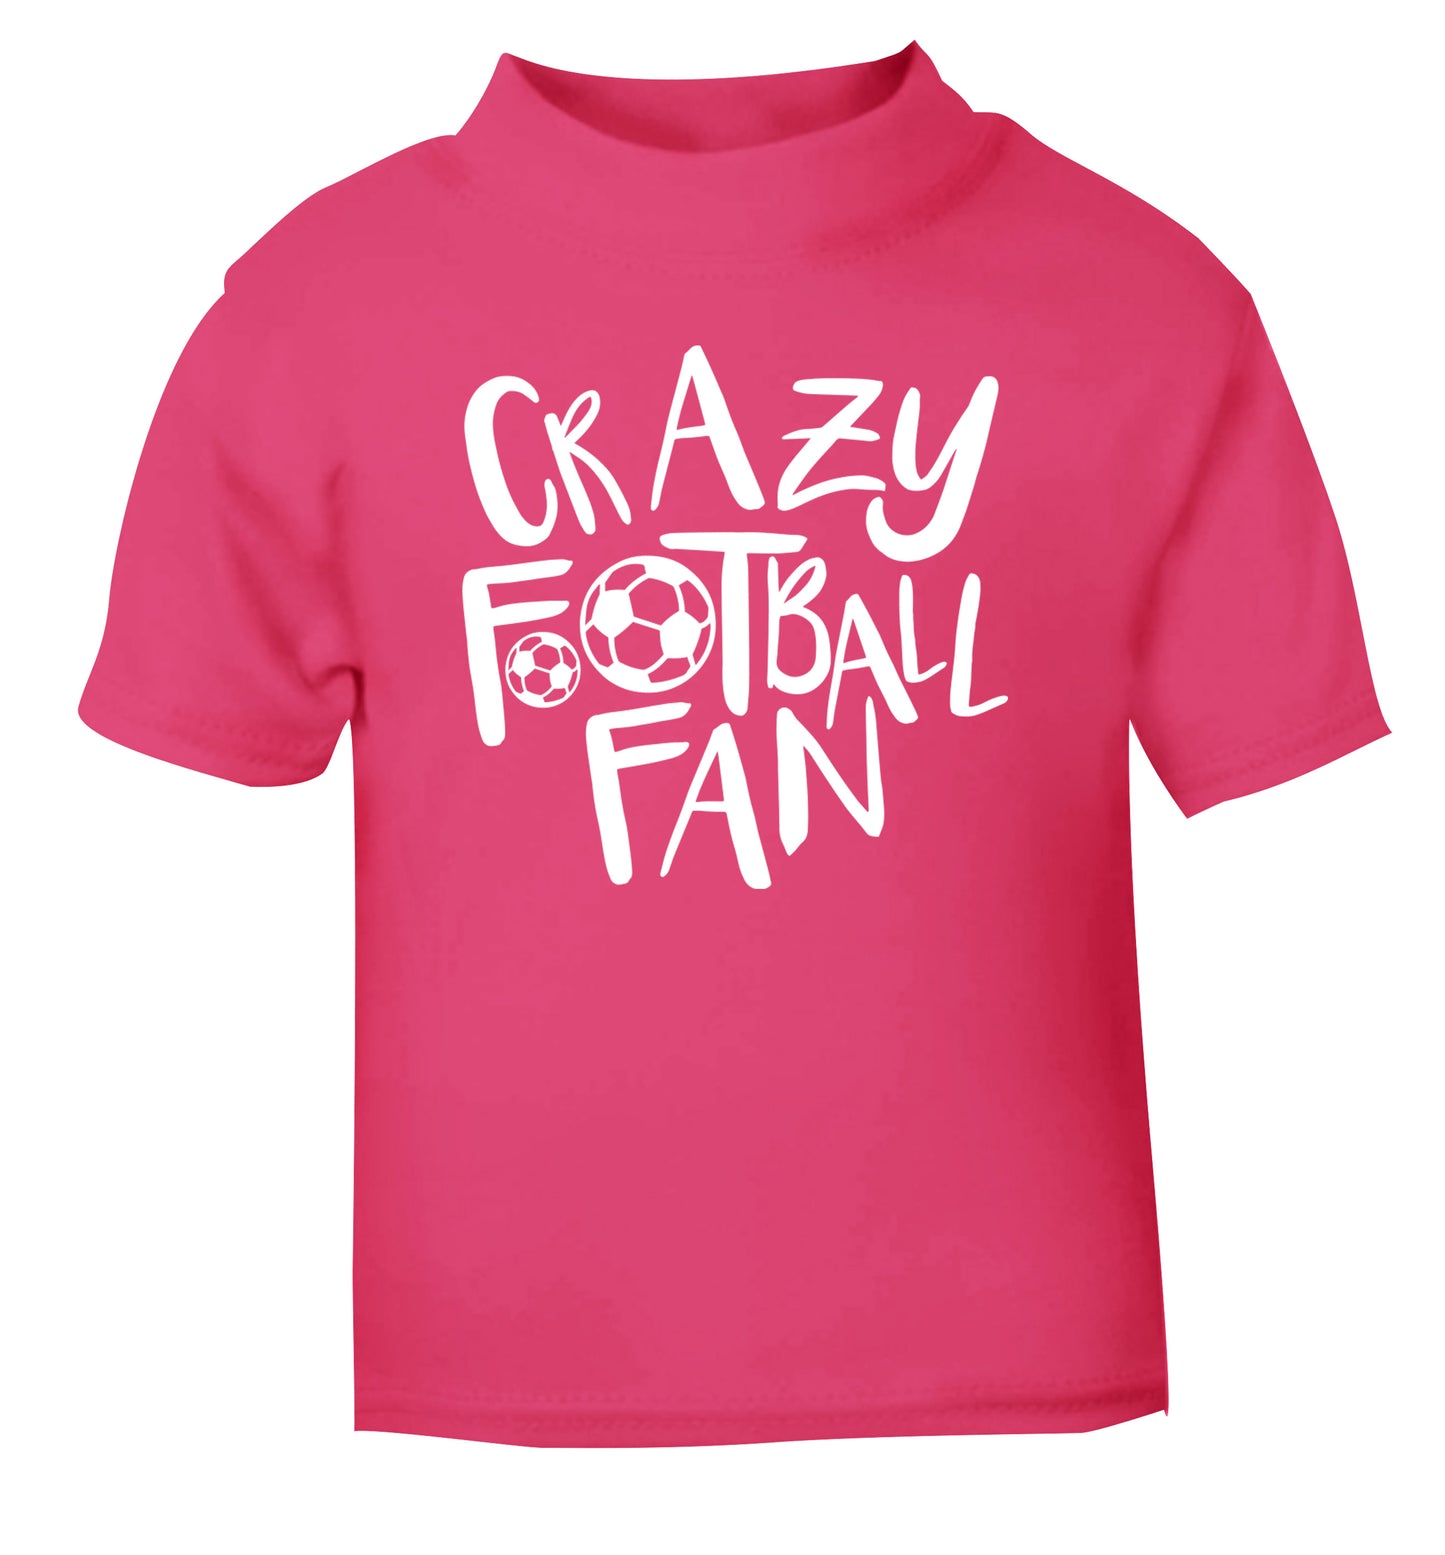 Crazy football fan pink Baby Toddler Tshirt 2 Years